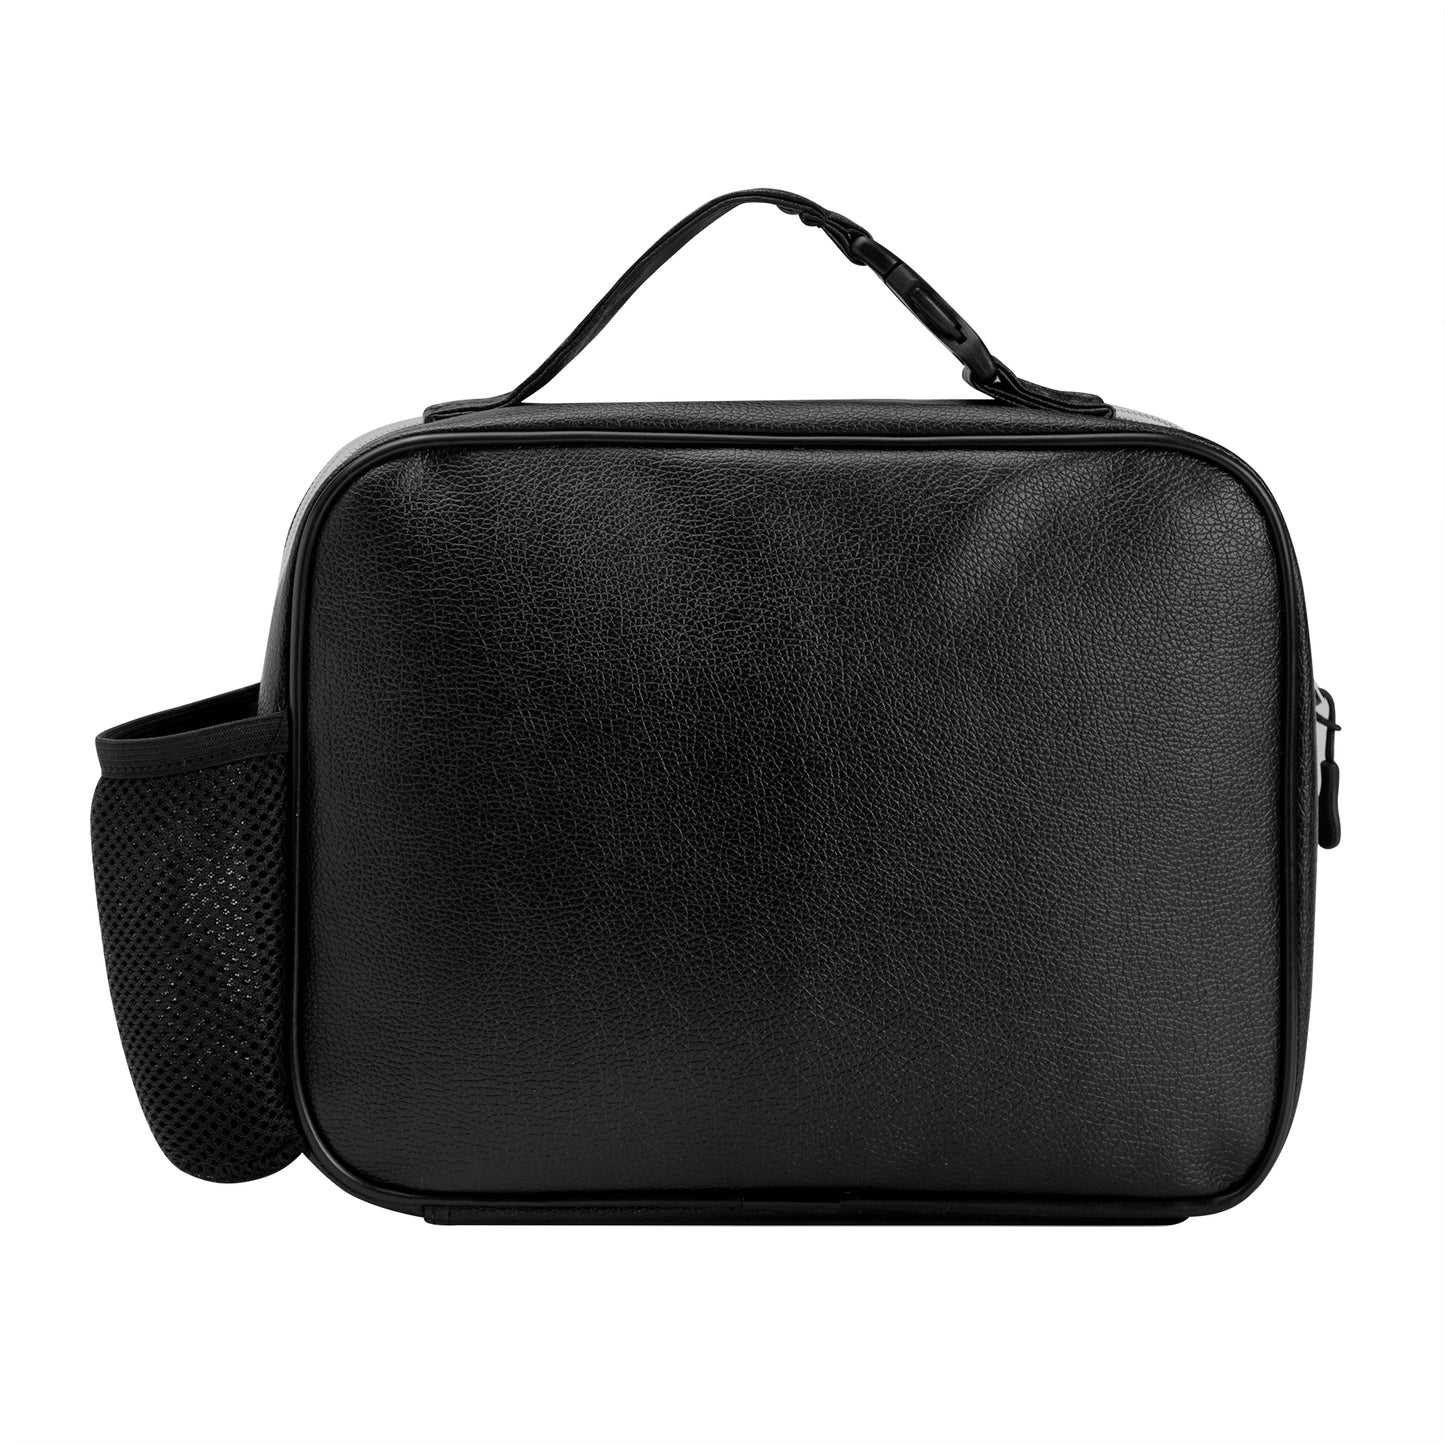 Skull gothic Detachable Leather Lunch Bag